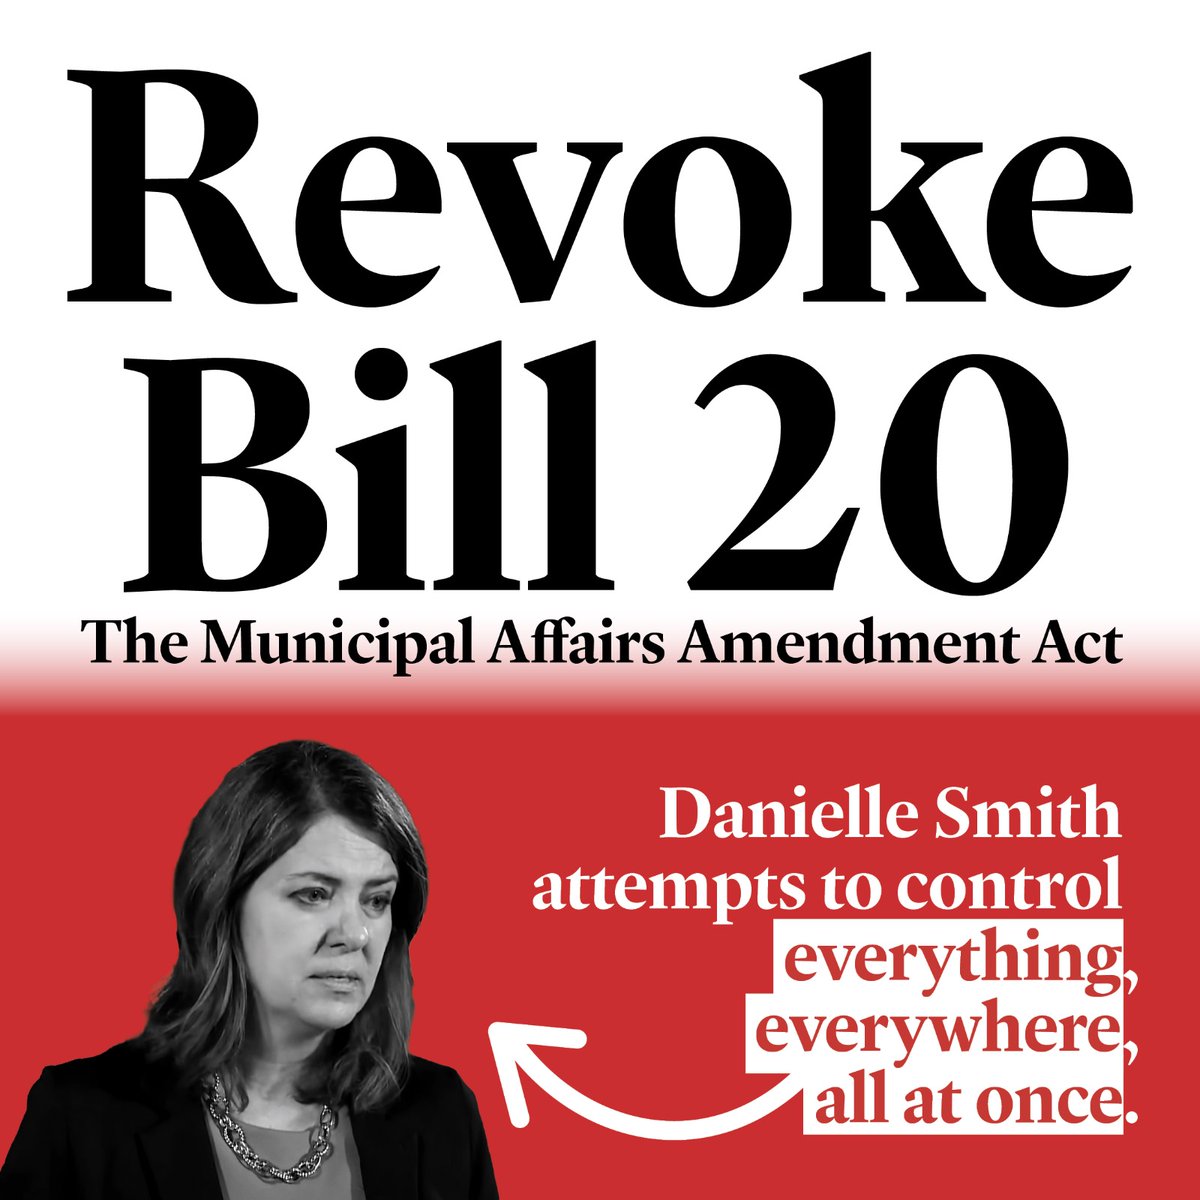 “As Alberta’s gatekeeper-in-chief, Danielle Smith is ripping away not just the rights of Alberta voters, but the ability of municipalities to effectively serve Albertans. She is setting up a totalitarian government for herself that is deeply disturbing.” - @kylekasawski 
#ableg